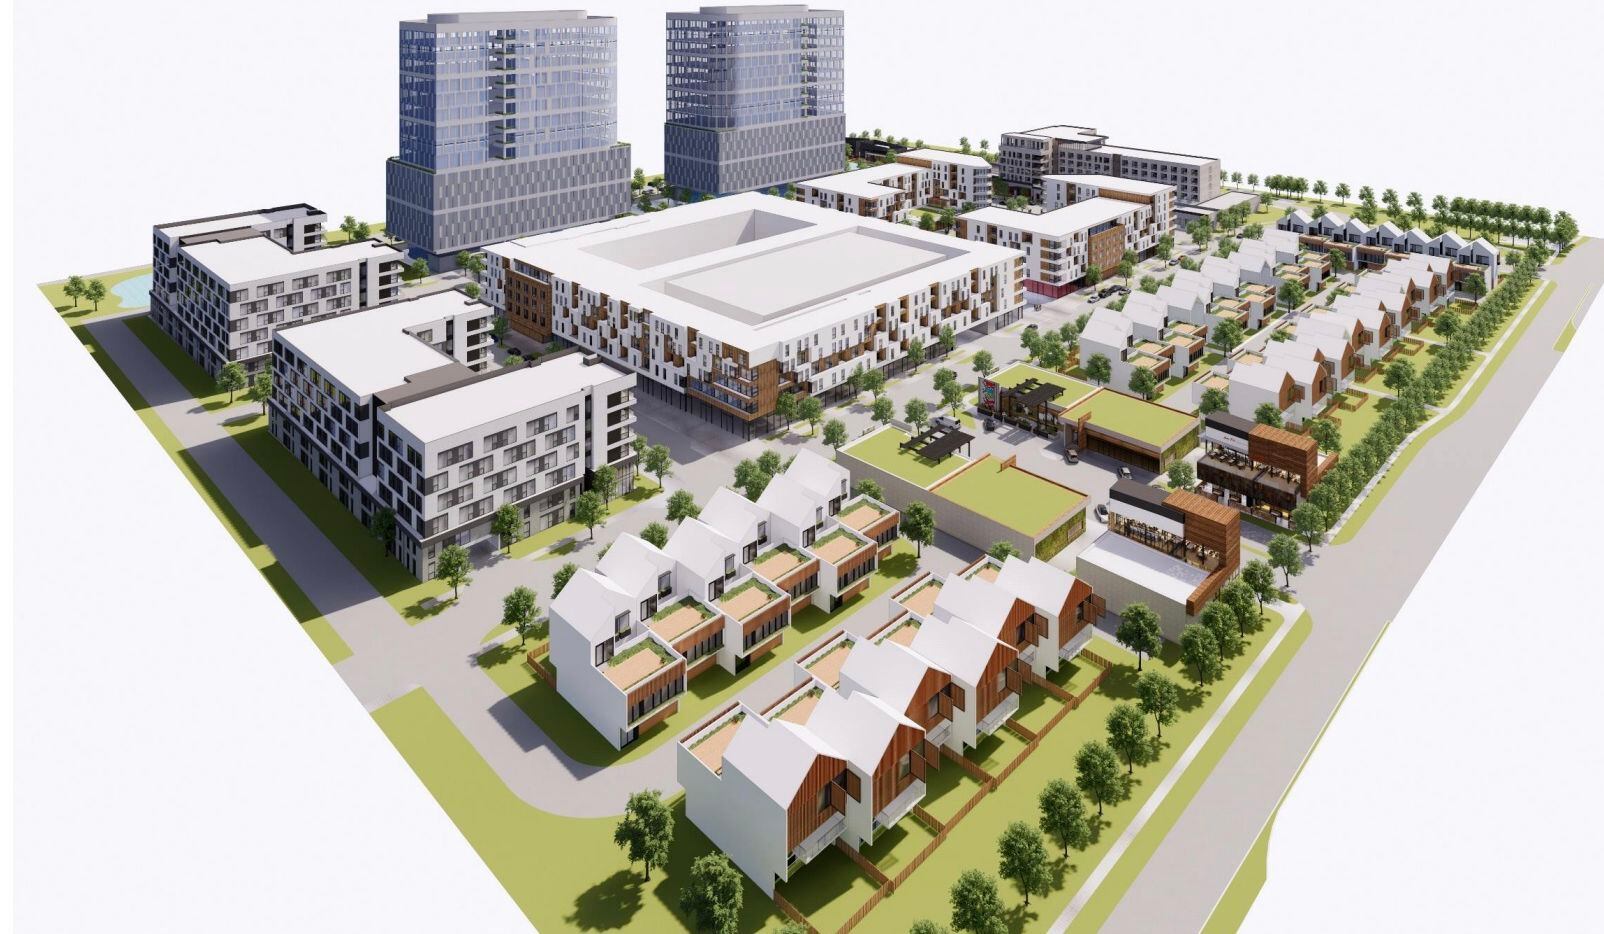 Developers want to build a mixed-use project with offices, retail, apartments, a hotel and...